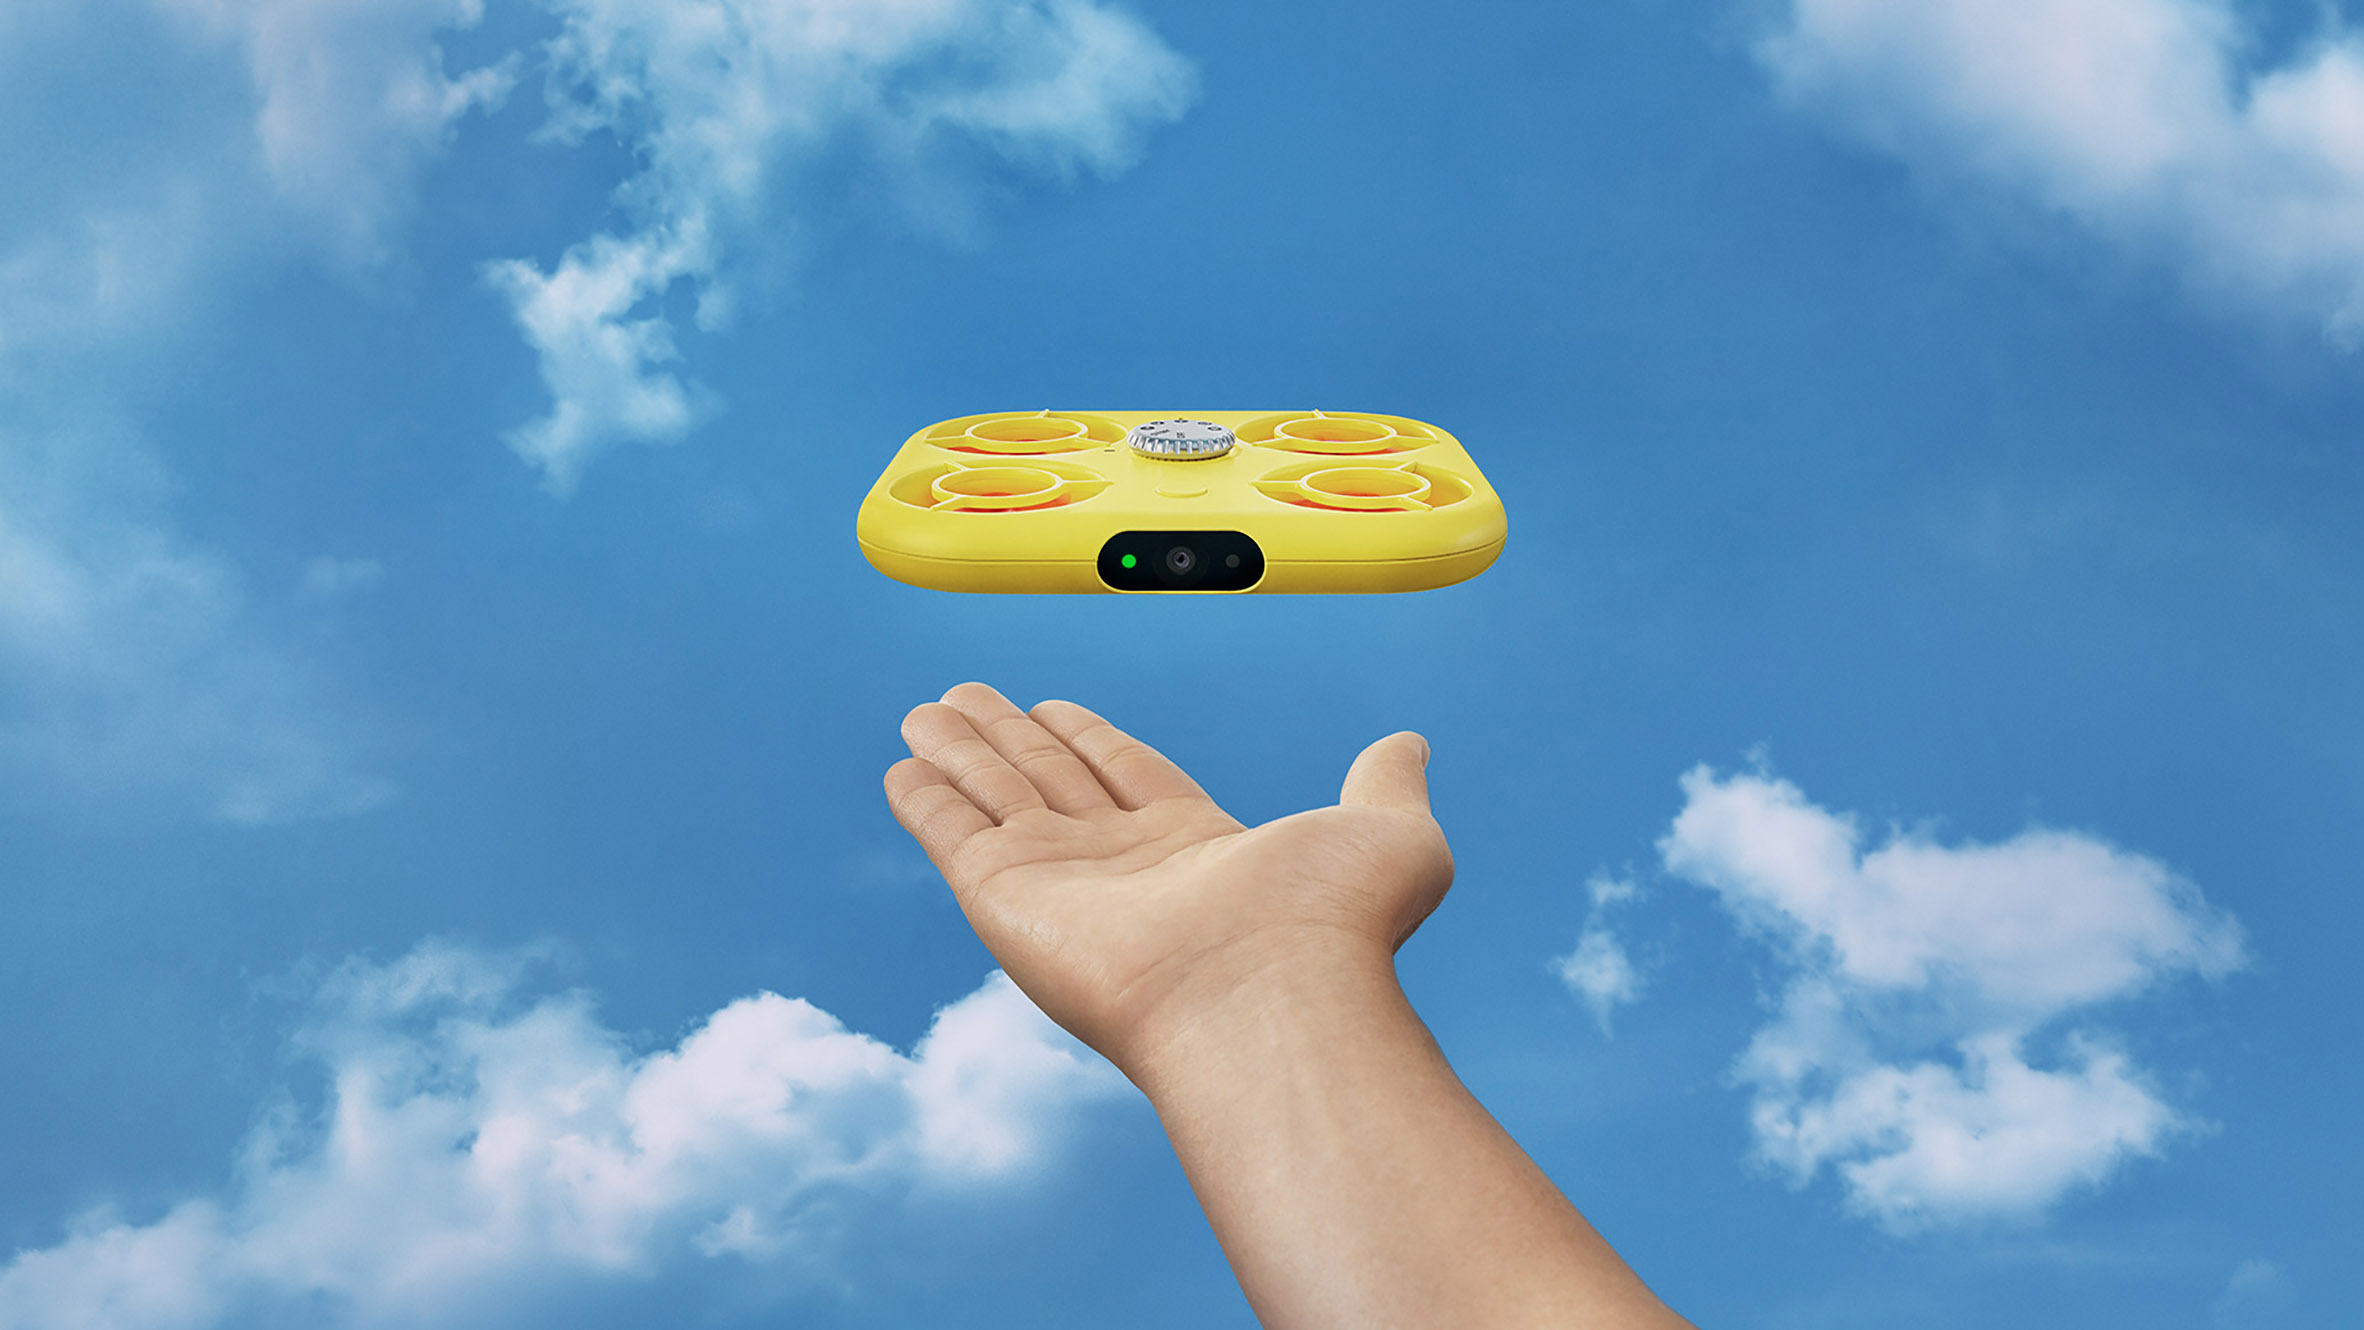 Snapchat Pixy drone by Snap Inc